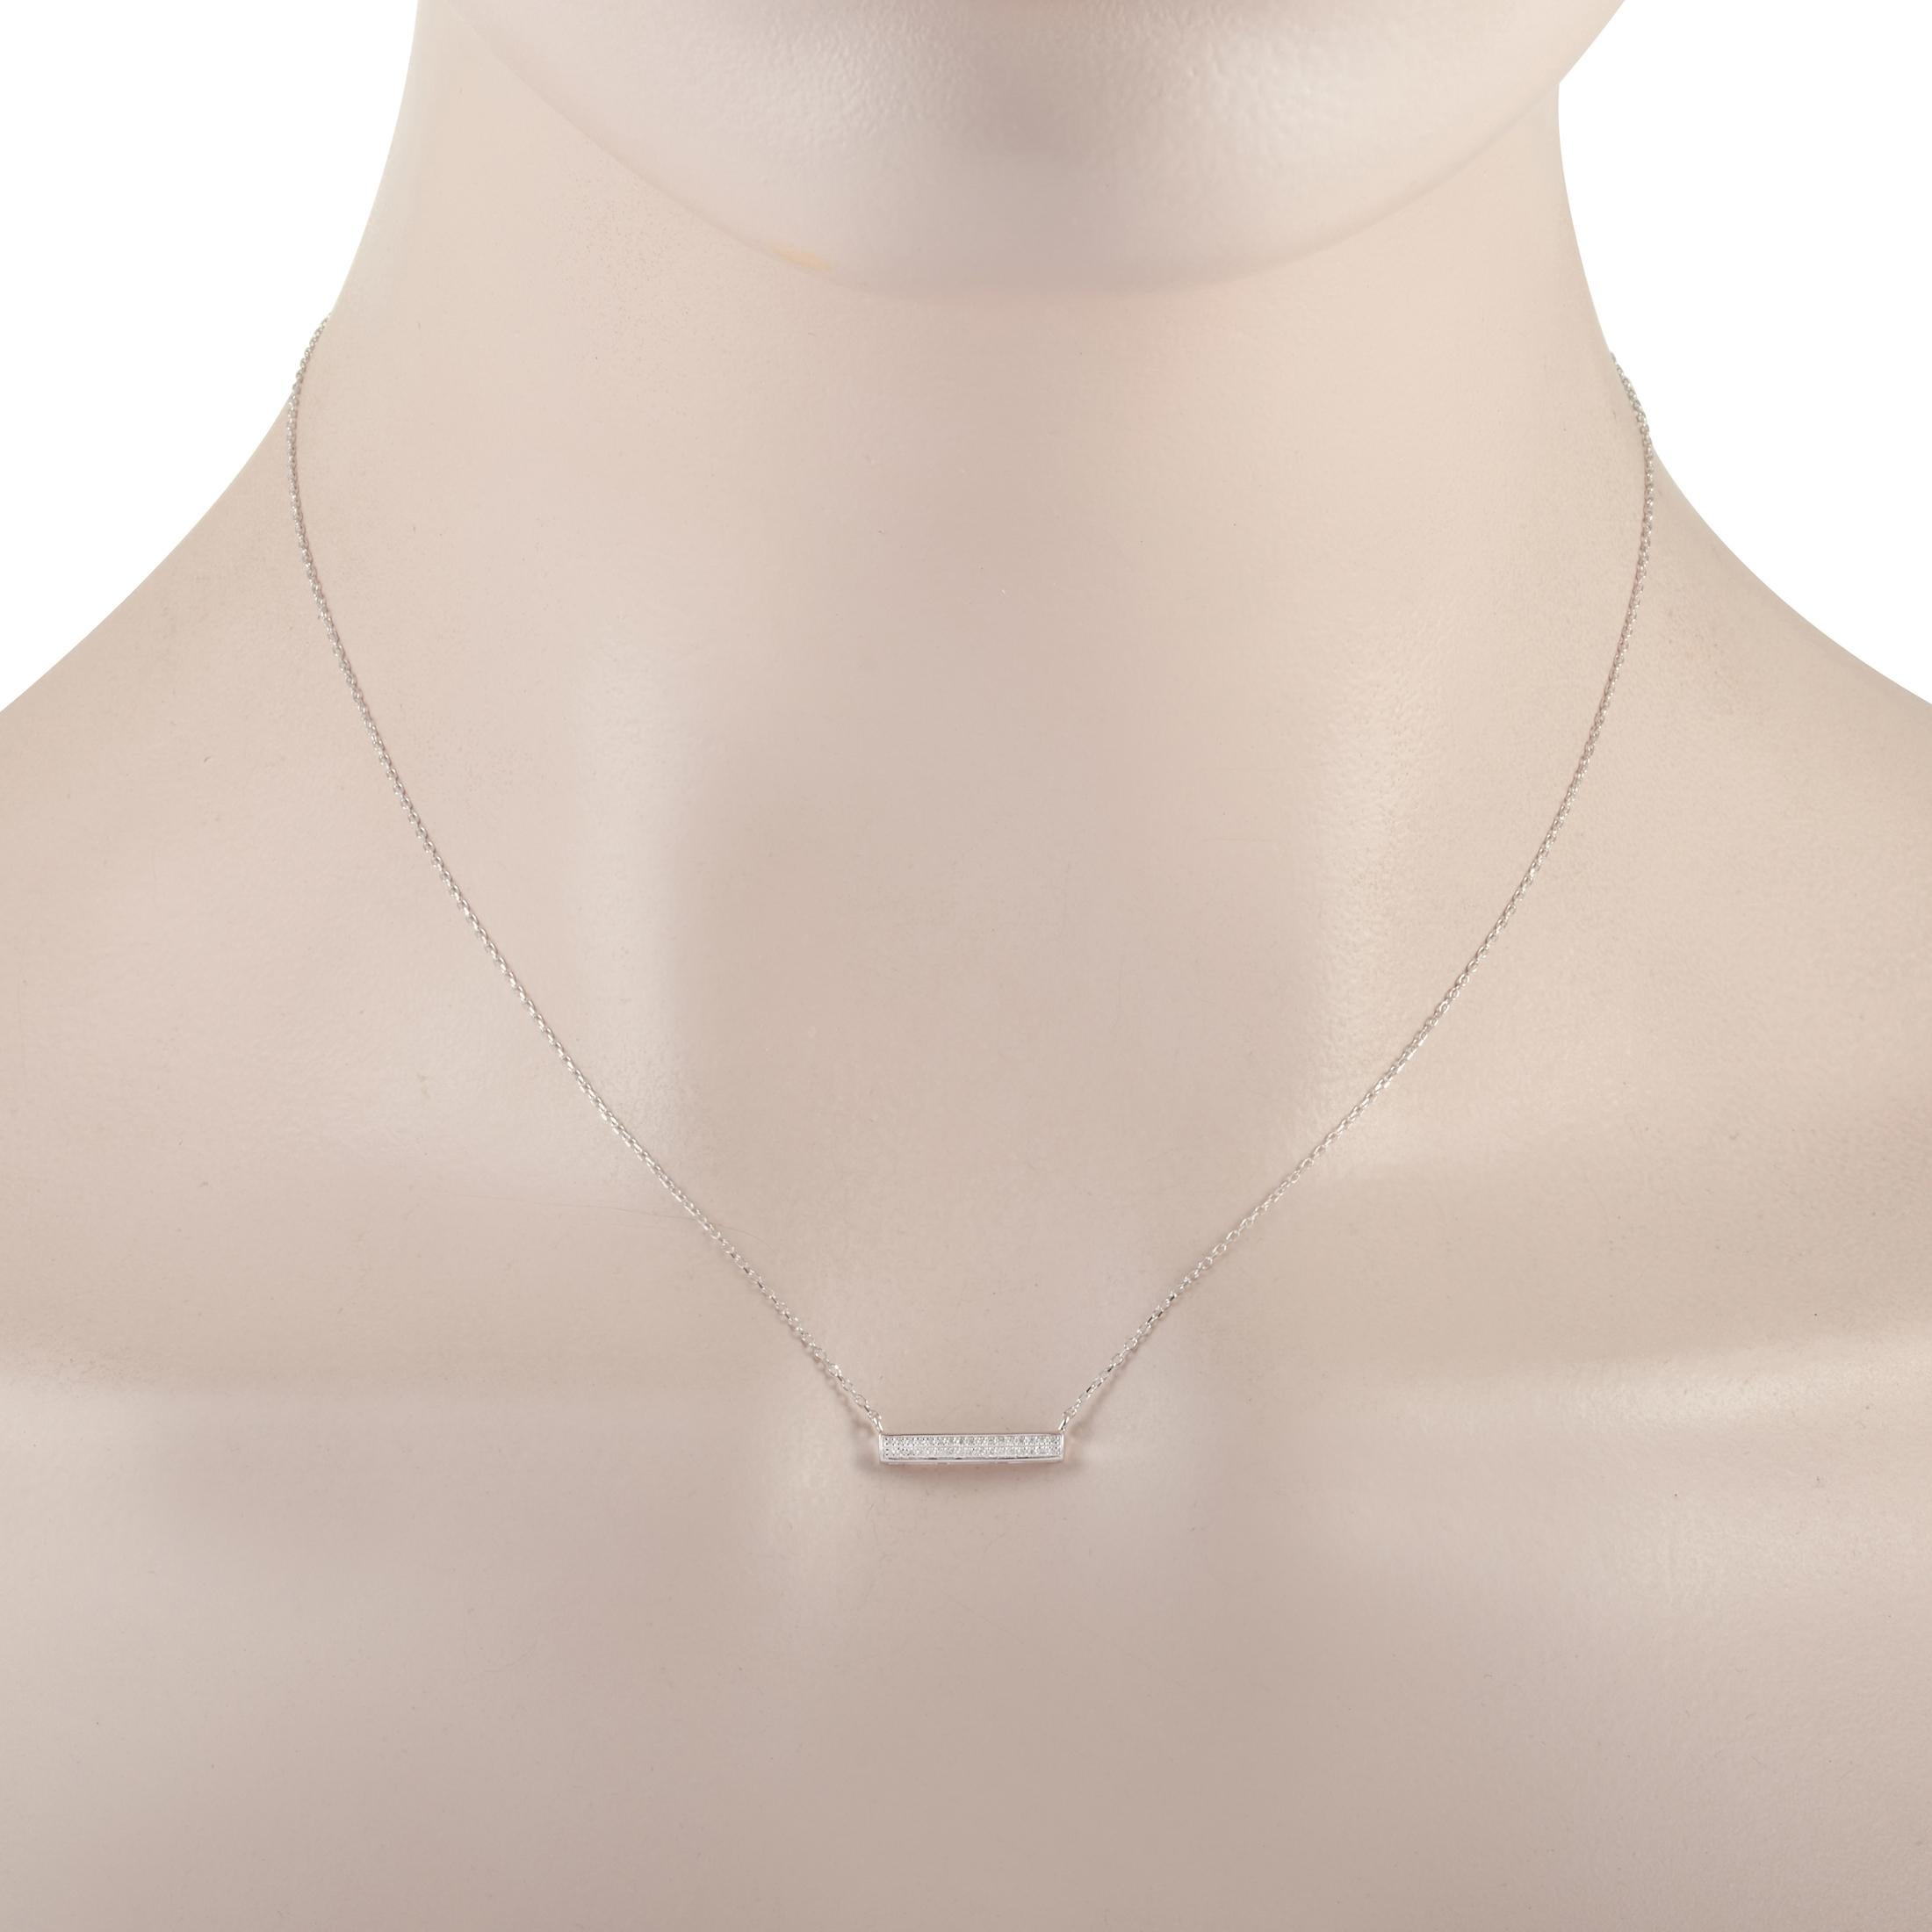 This LB Exclusive necklace is crafted from 14K white gold and weighs 1.5 grams. It is presented with a 15” chain and boasts a pendant that measures 0.13” in length and 0.63” in width. The necklace is set with diamonds that total 0.10 carats.
 
